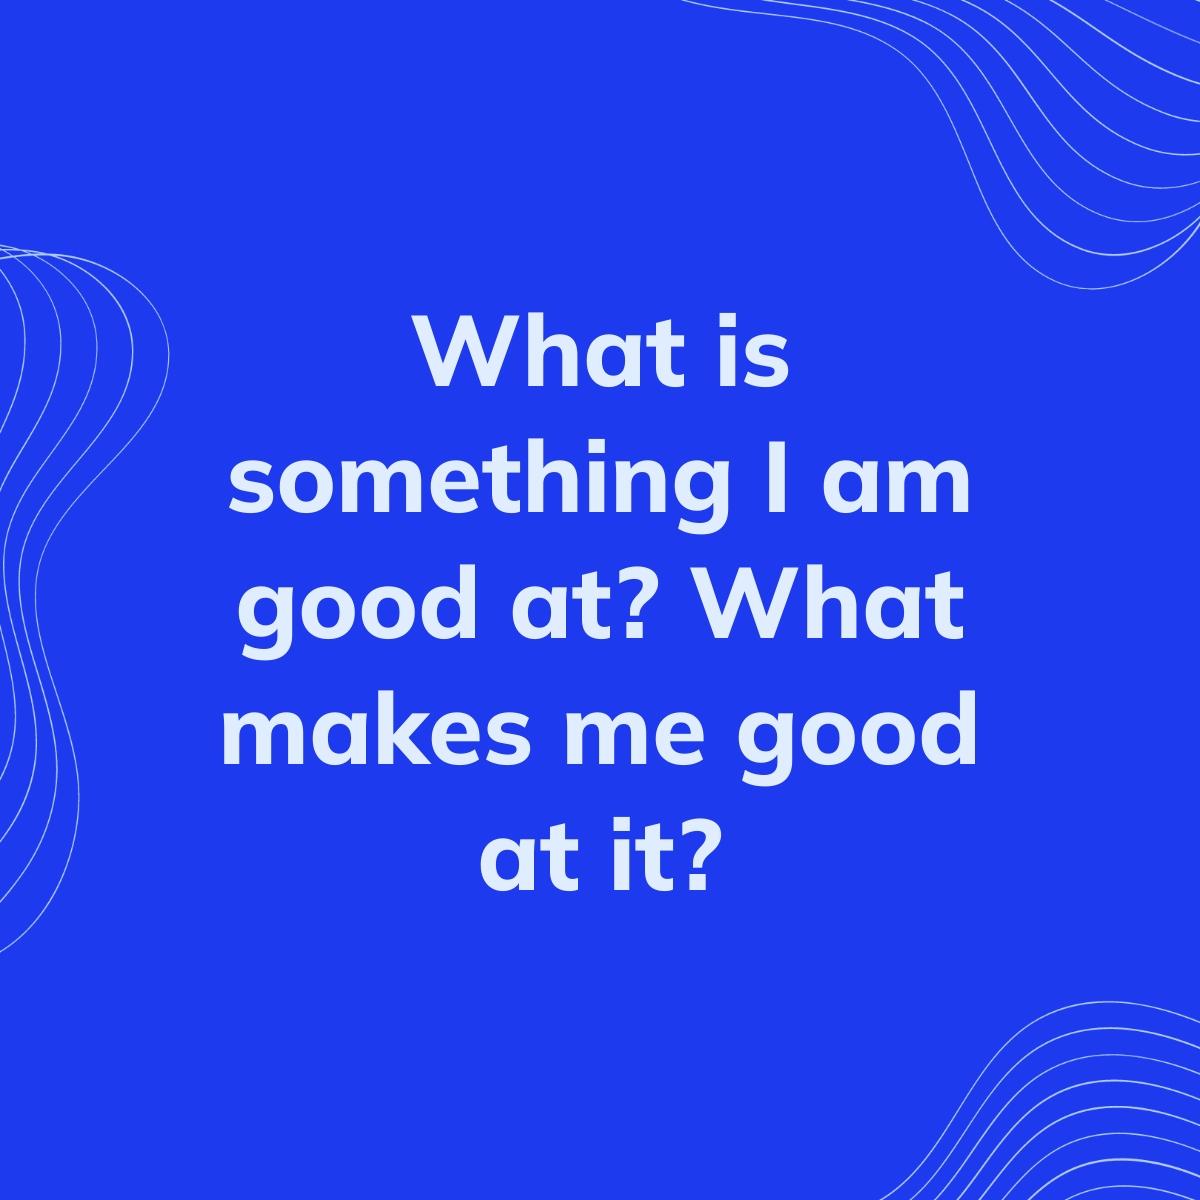 Journal Prompt: What is something I am good at? What makes me good at it?